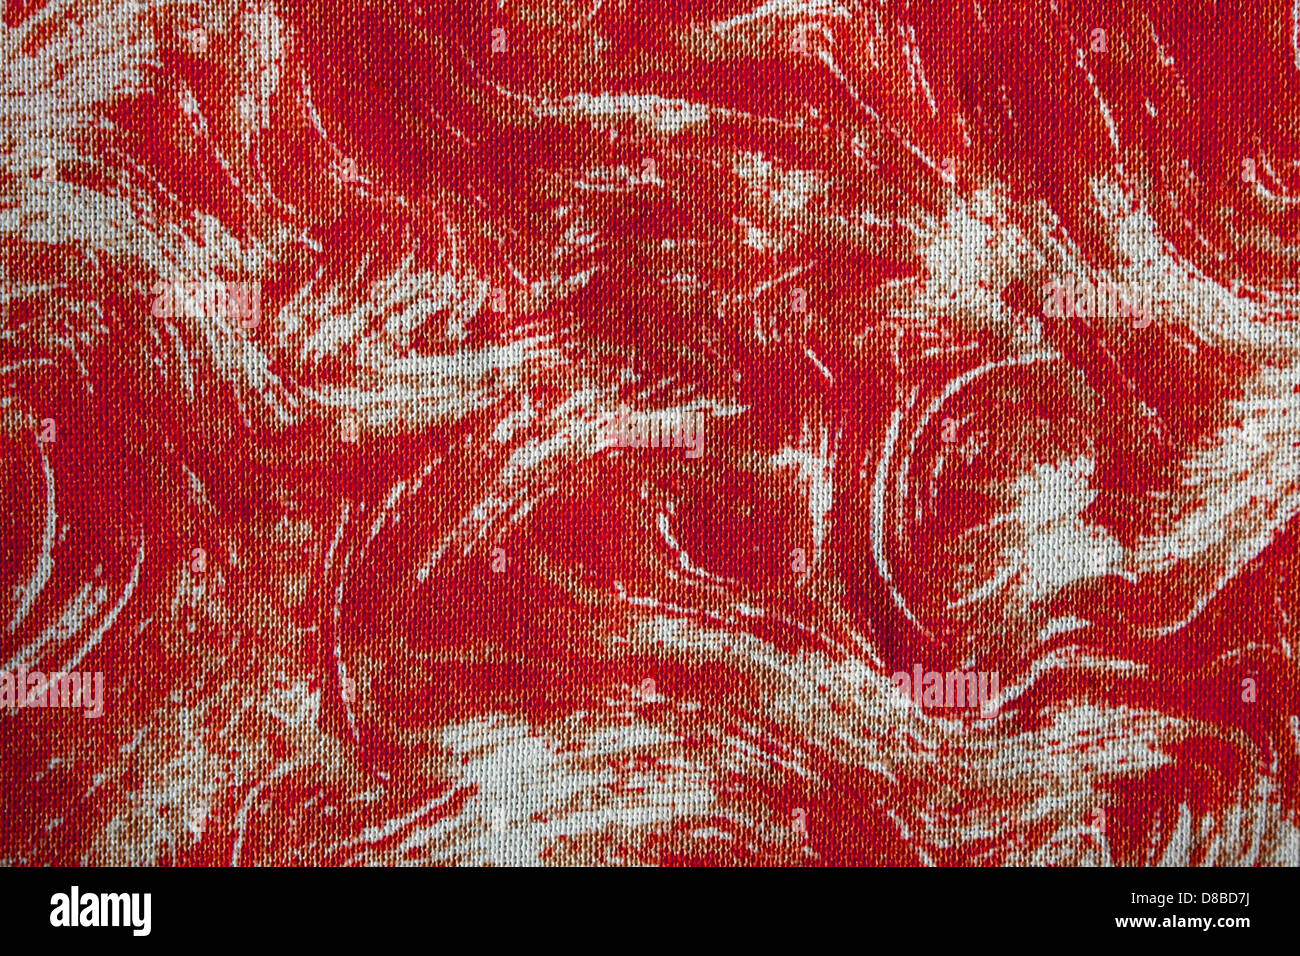 fabric texture with red swirl pattern Stock Photo - Alamy